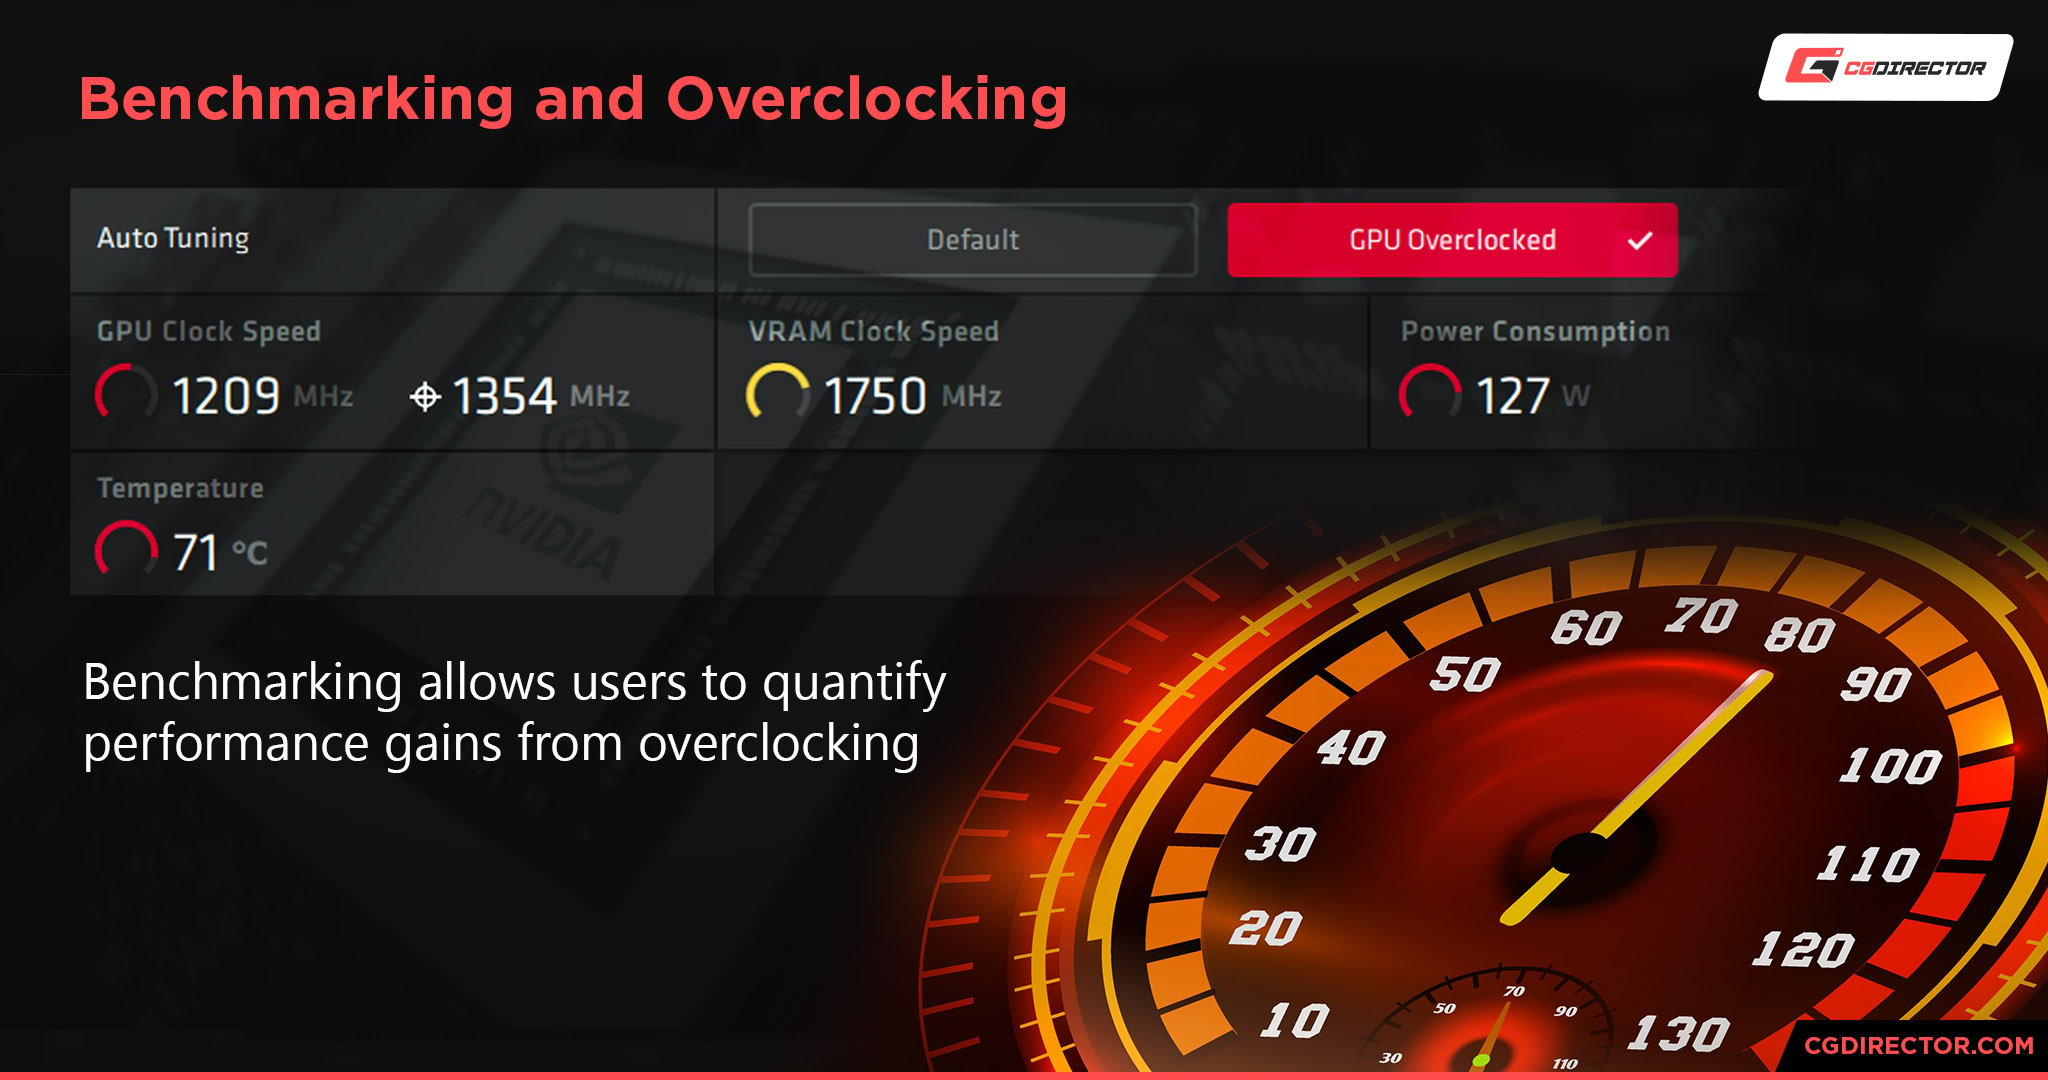 Benchmarking and Overclocking